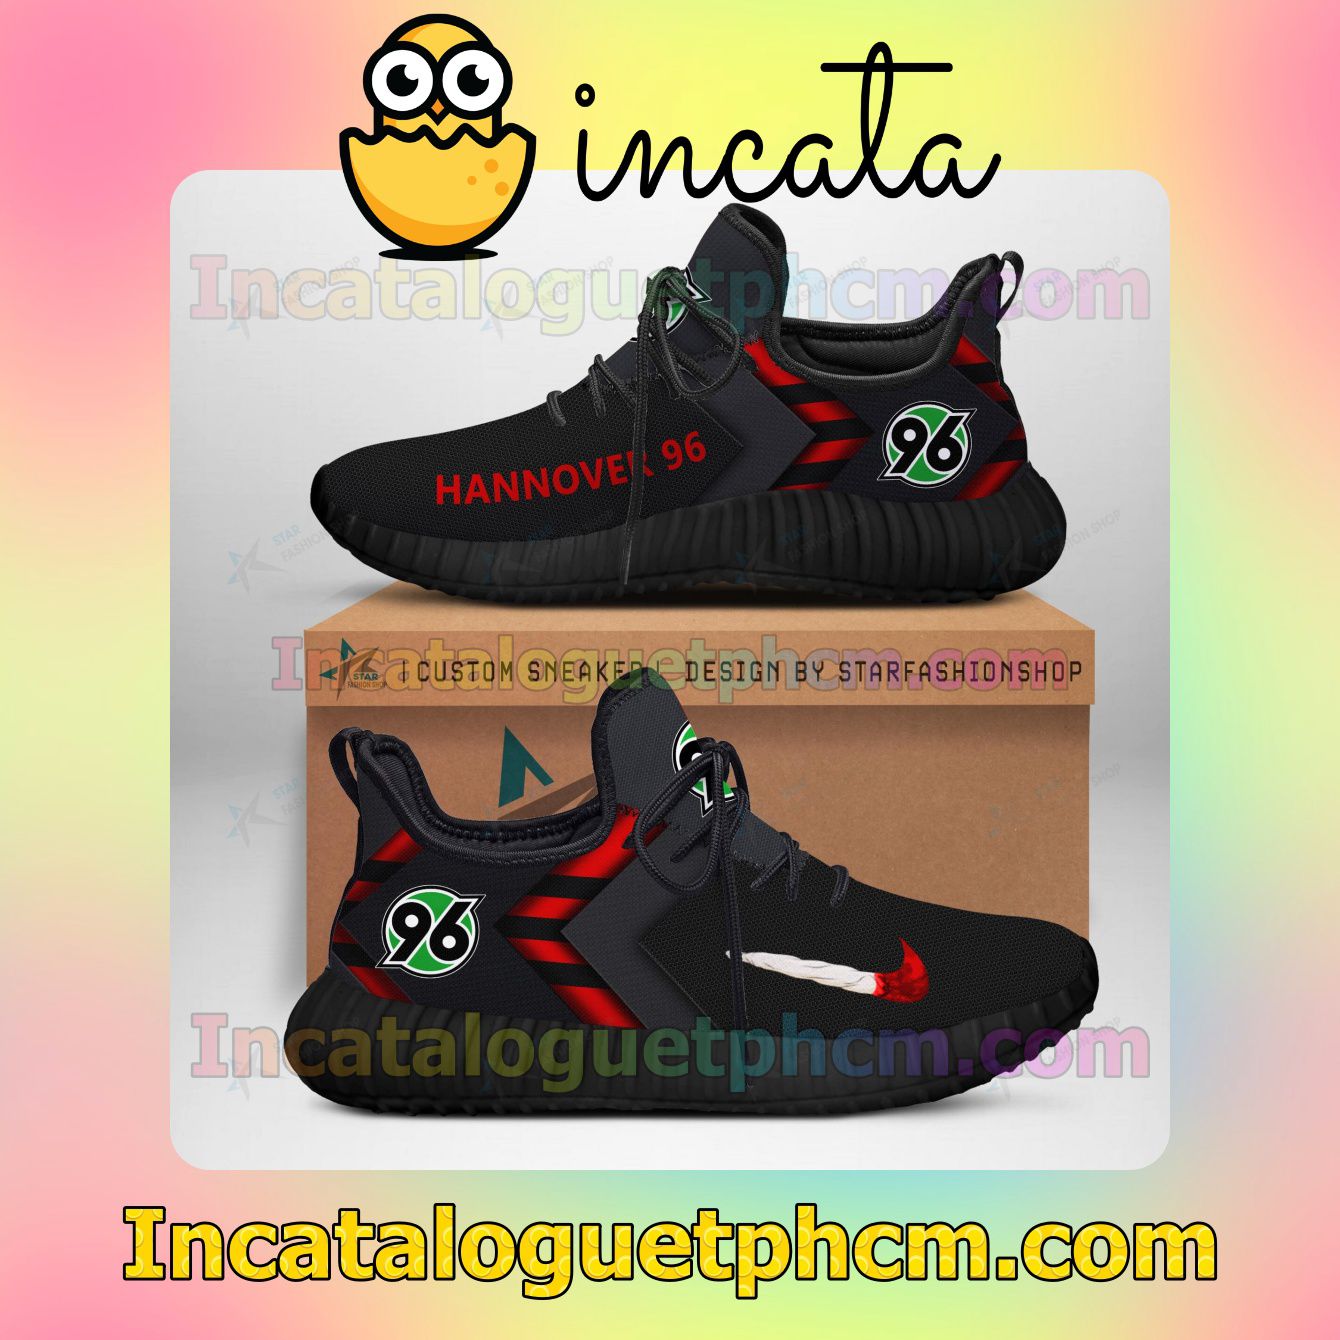 eBay Hannover 96 Ultraboost Yeezy Shoes Sneakers